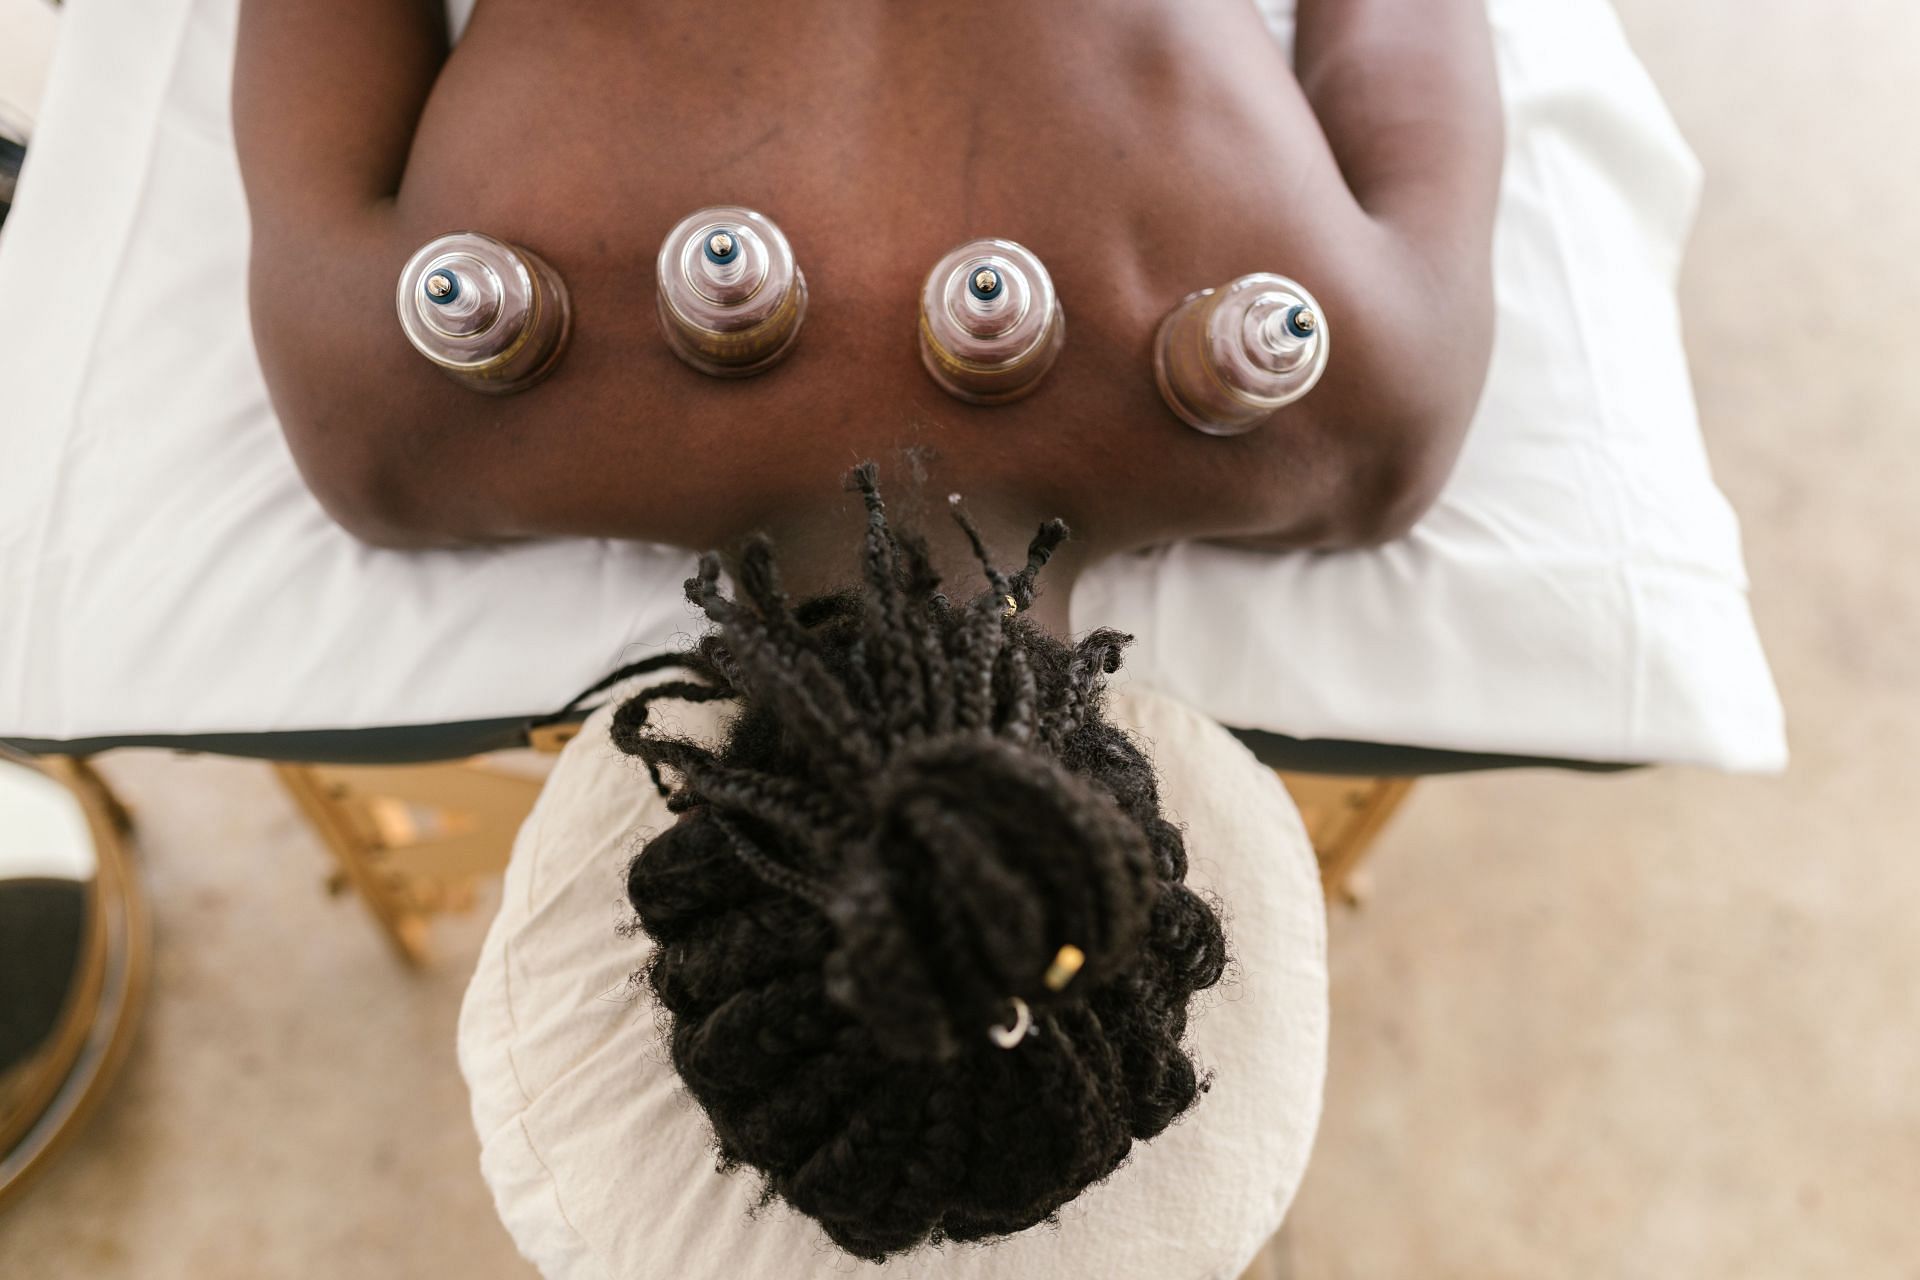 Cupping therapy improves blood circulation. (Image via Pexels/ Rodnae Productions)